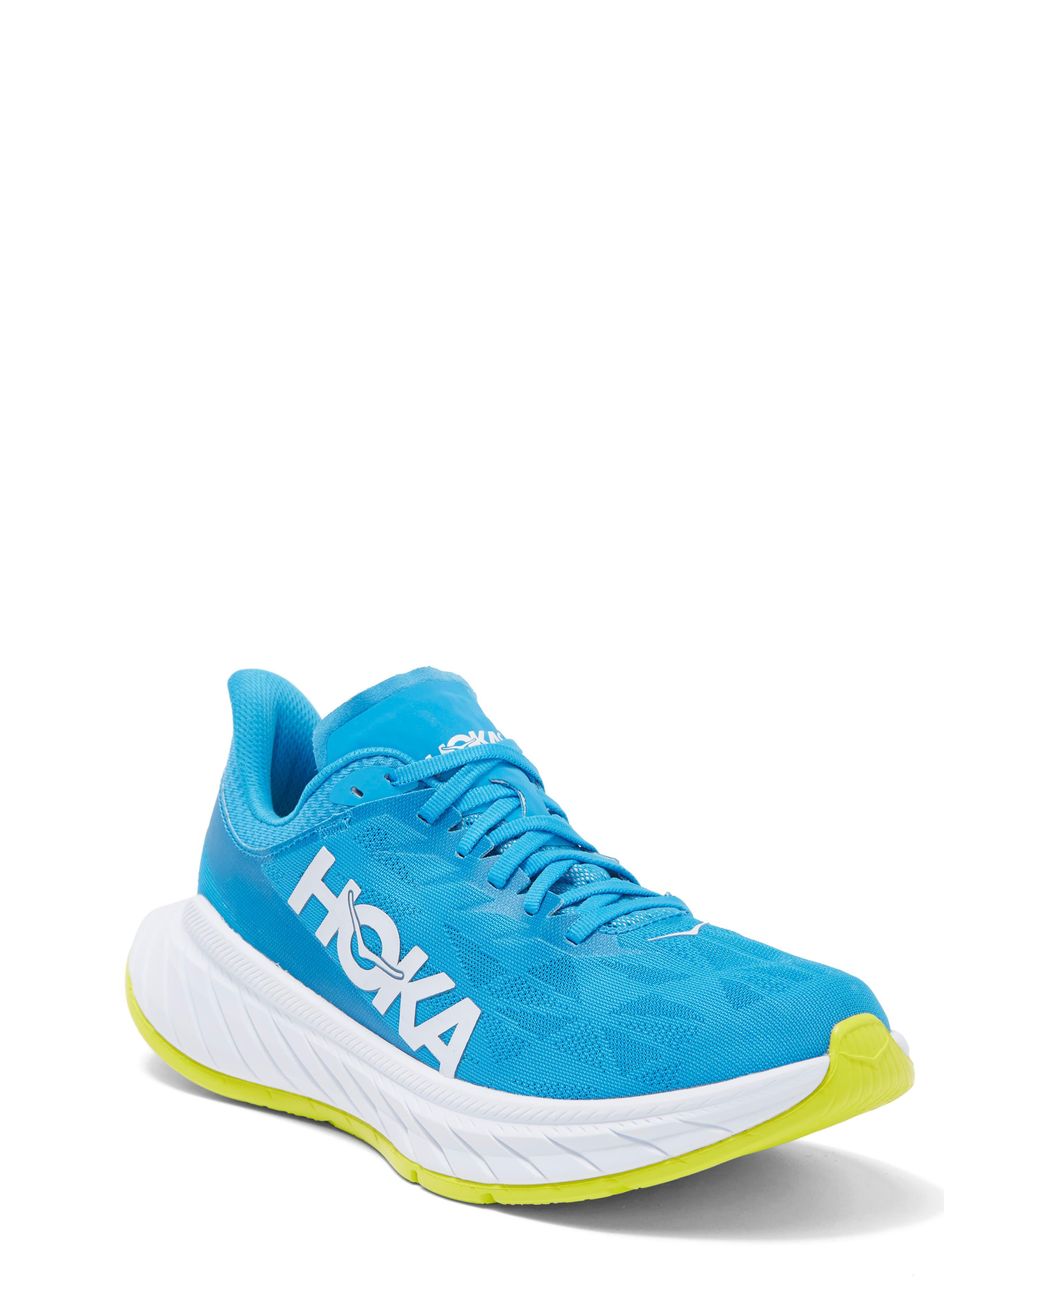 Hoka One One Carbon X 2 Running Shoe In Diva Blue /citrus At Nordstrom ...